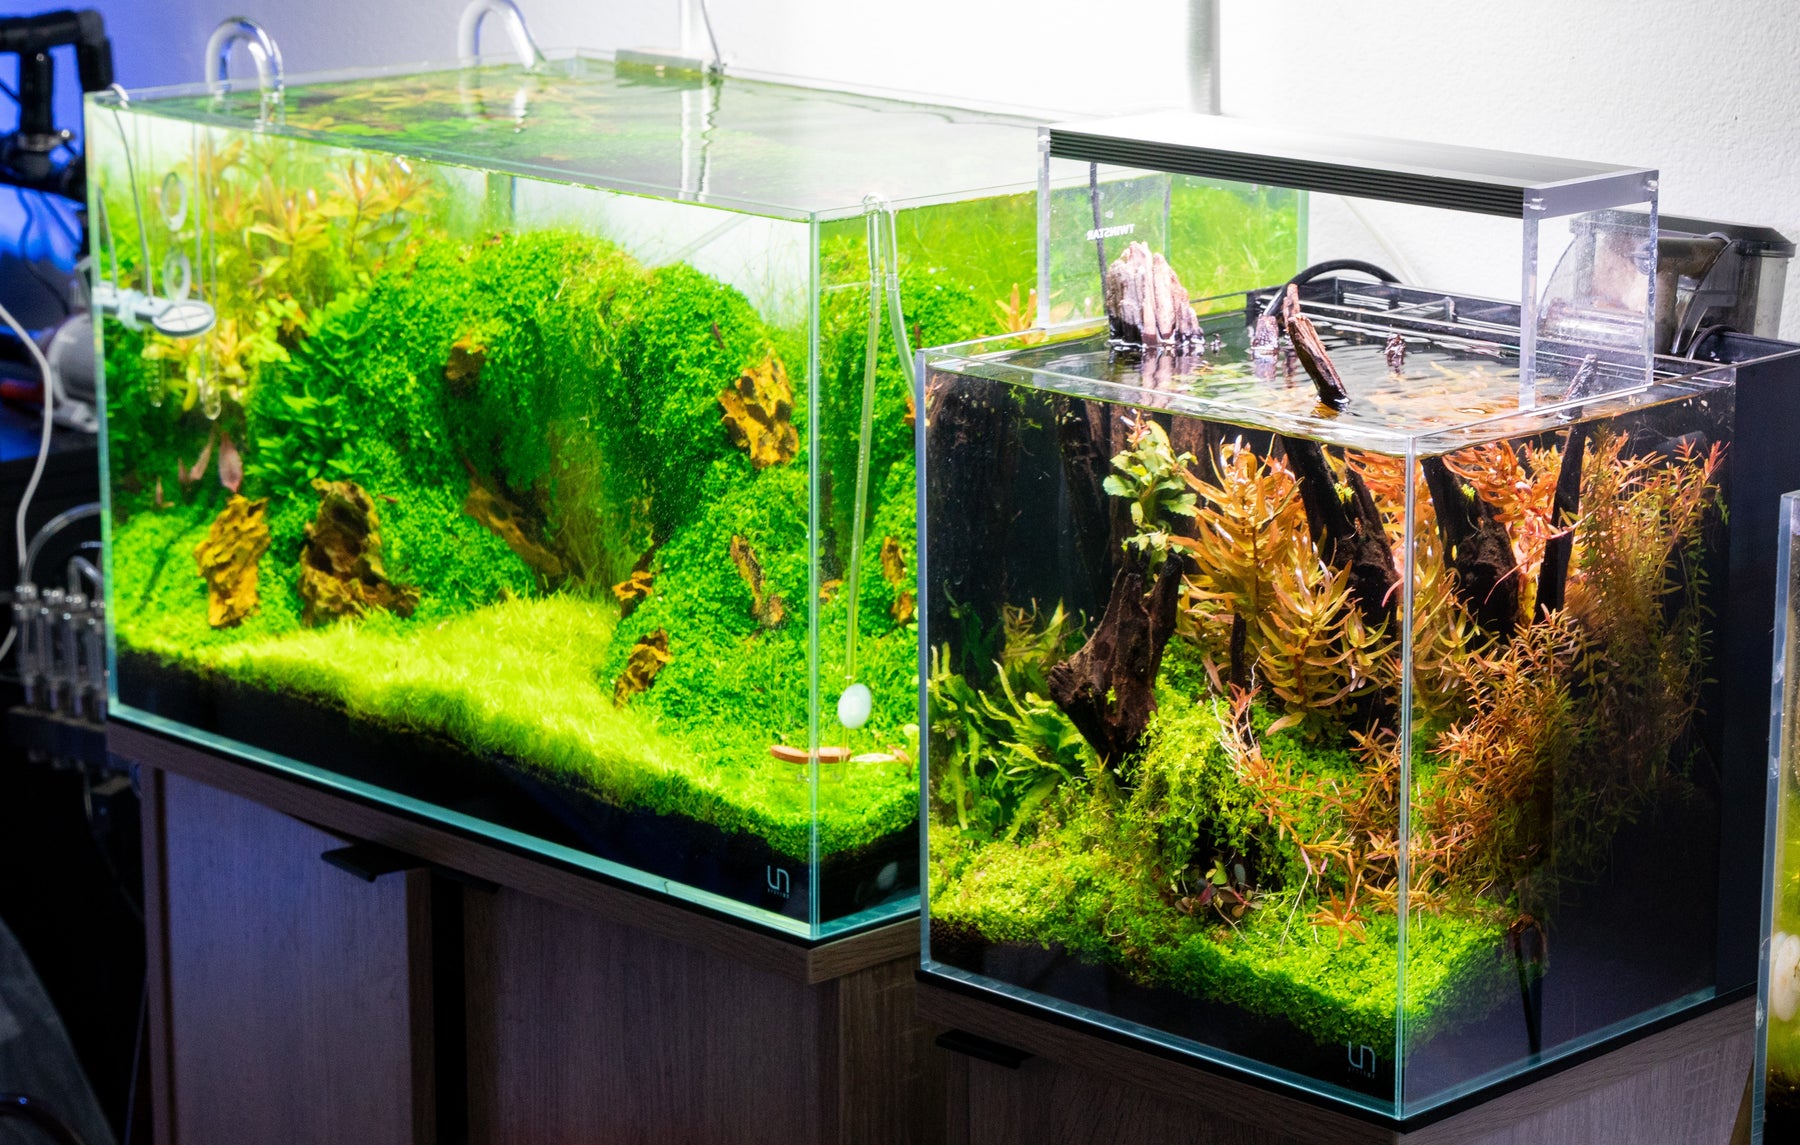 7 Things I Wish I Knew About Aquascaping